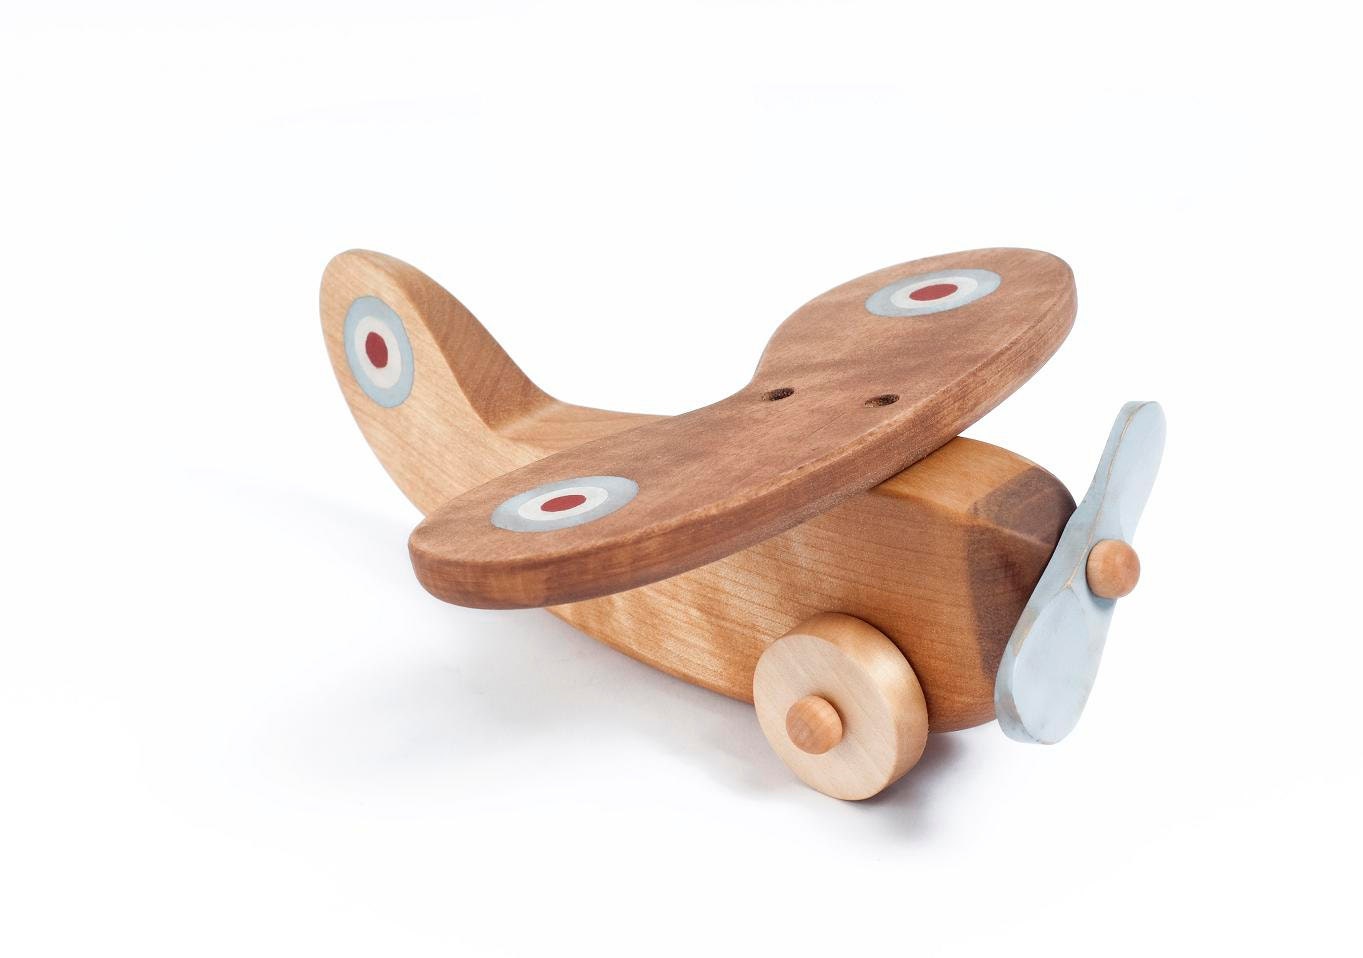 Wooden Airplane Toy Wooden Toy Plane Wood Plane Wooden Toys